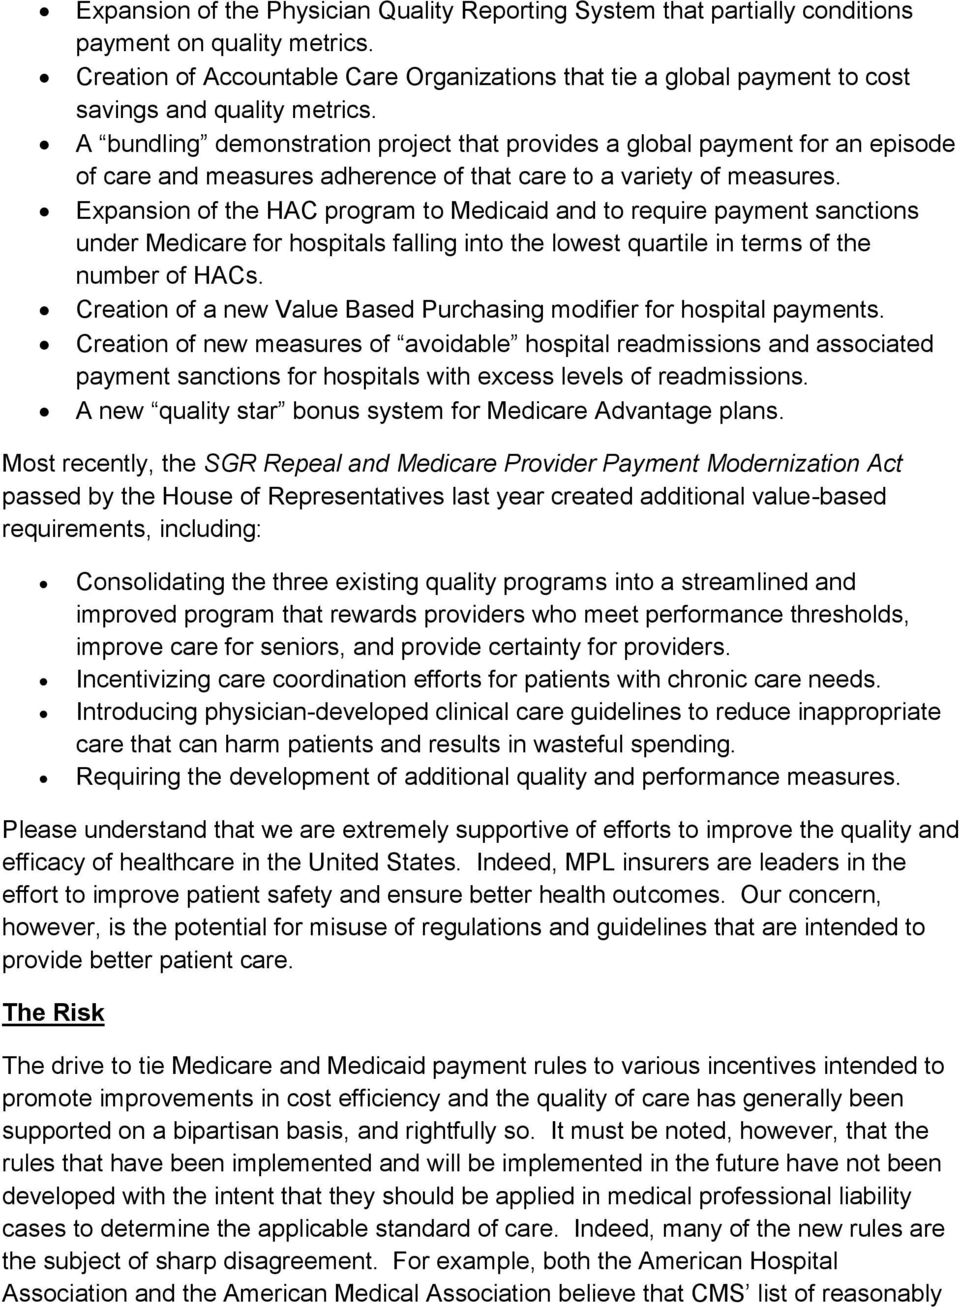 A bundling demonstration project that provides a global payment for an episode of care and measures adherence of that care to a variety of measures.